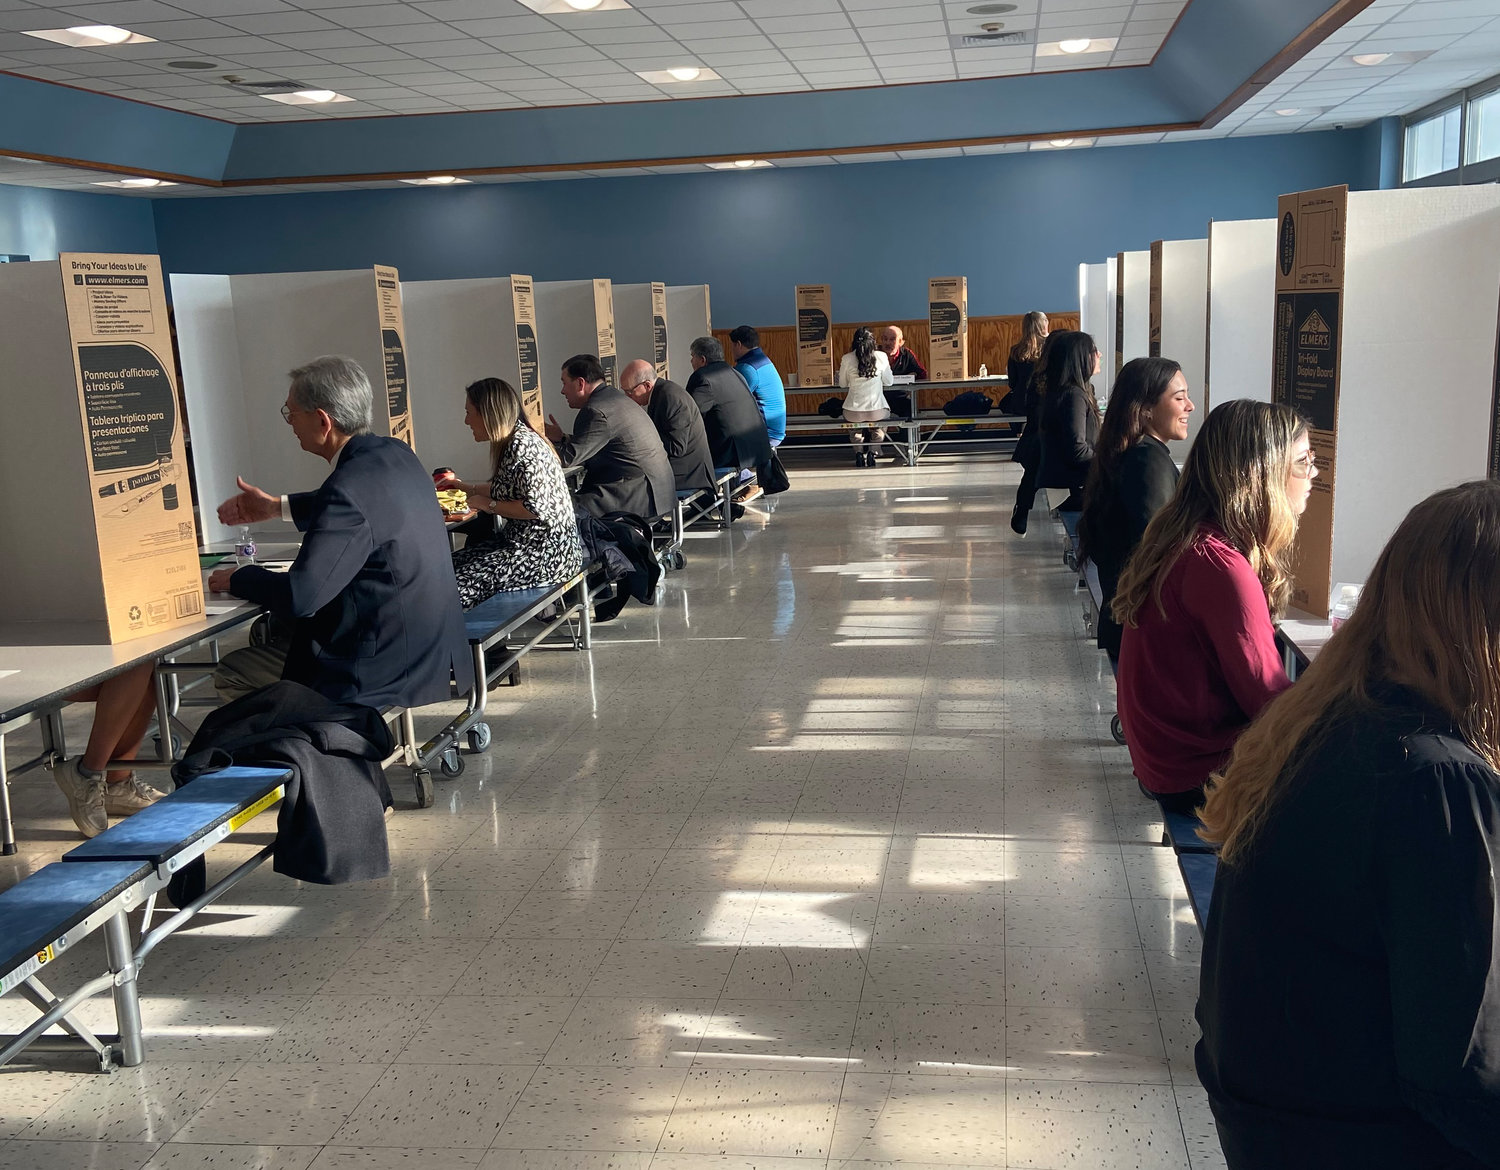 For 15 years, the chamber has hosted mock interviews, to give East Meadow and Clarke High School students some real-world interviewing experience.